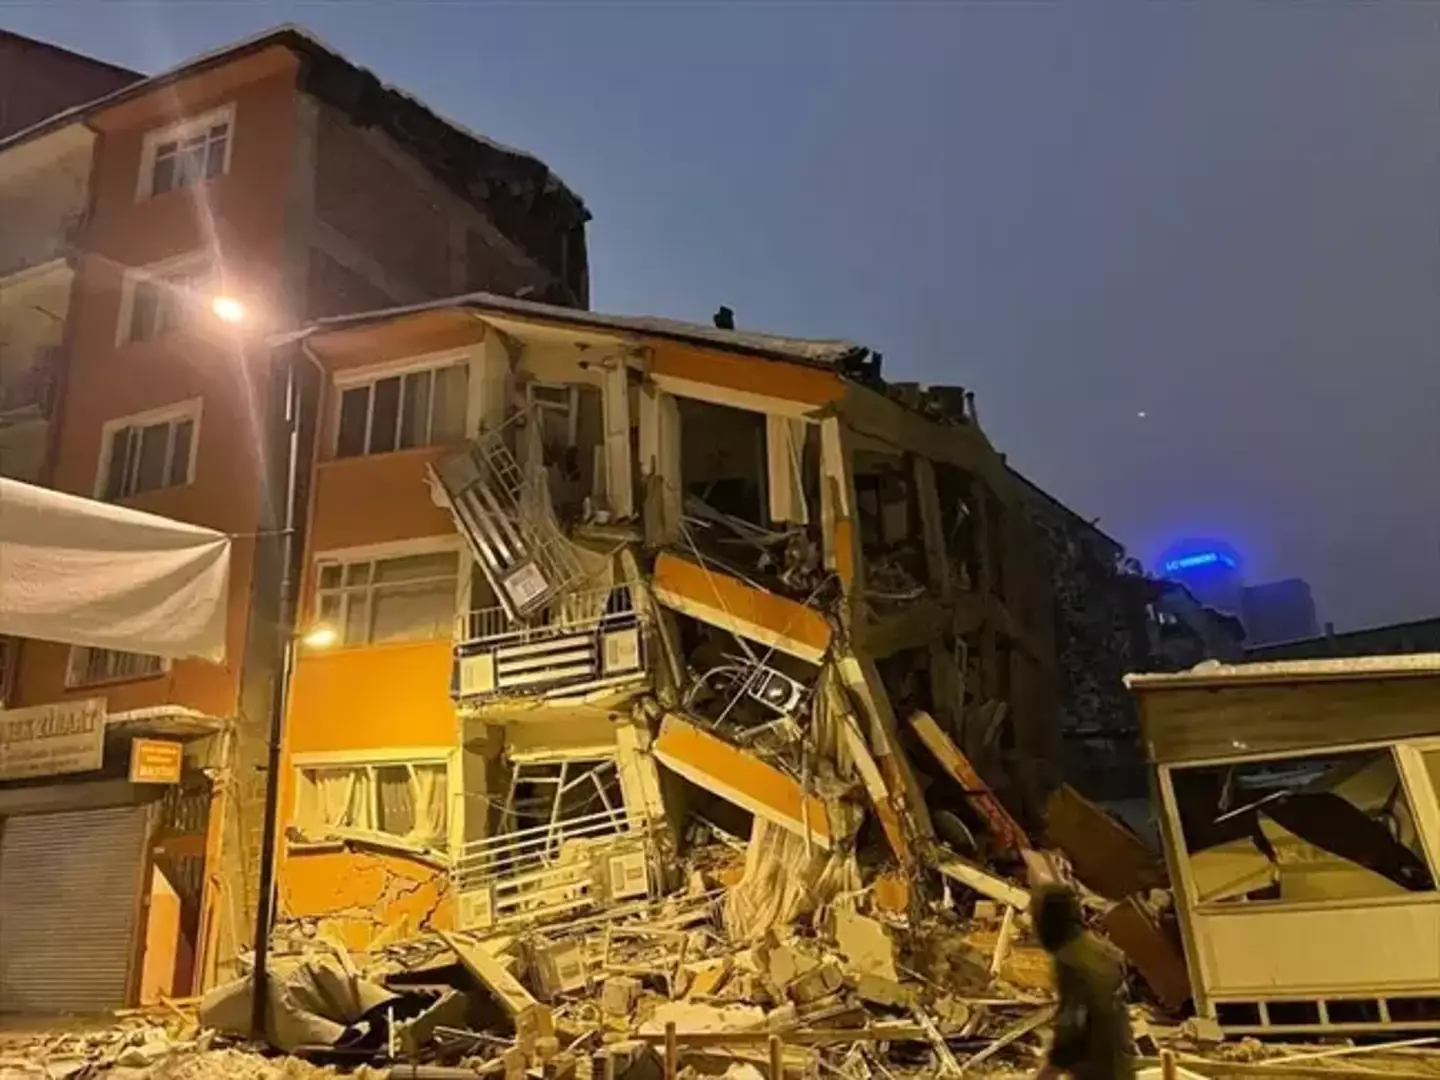 Houses were reduced to rubble by the powerful quake.